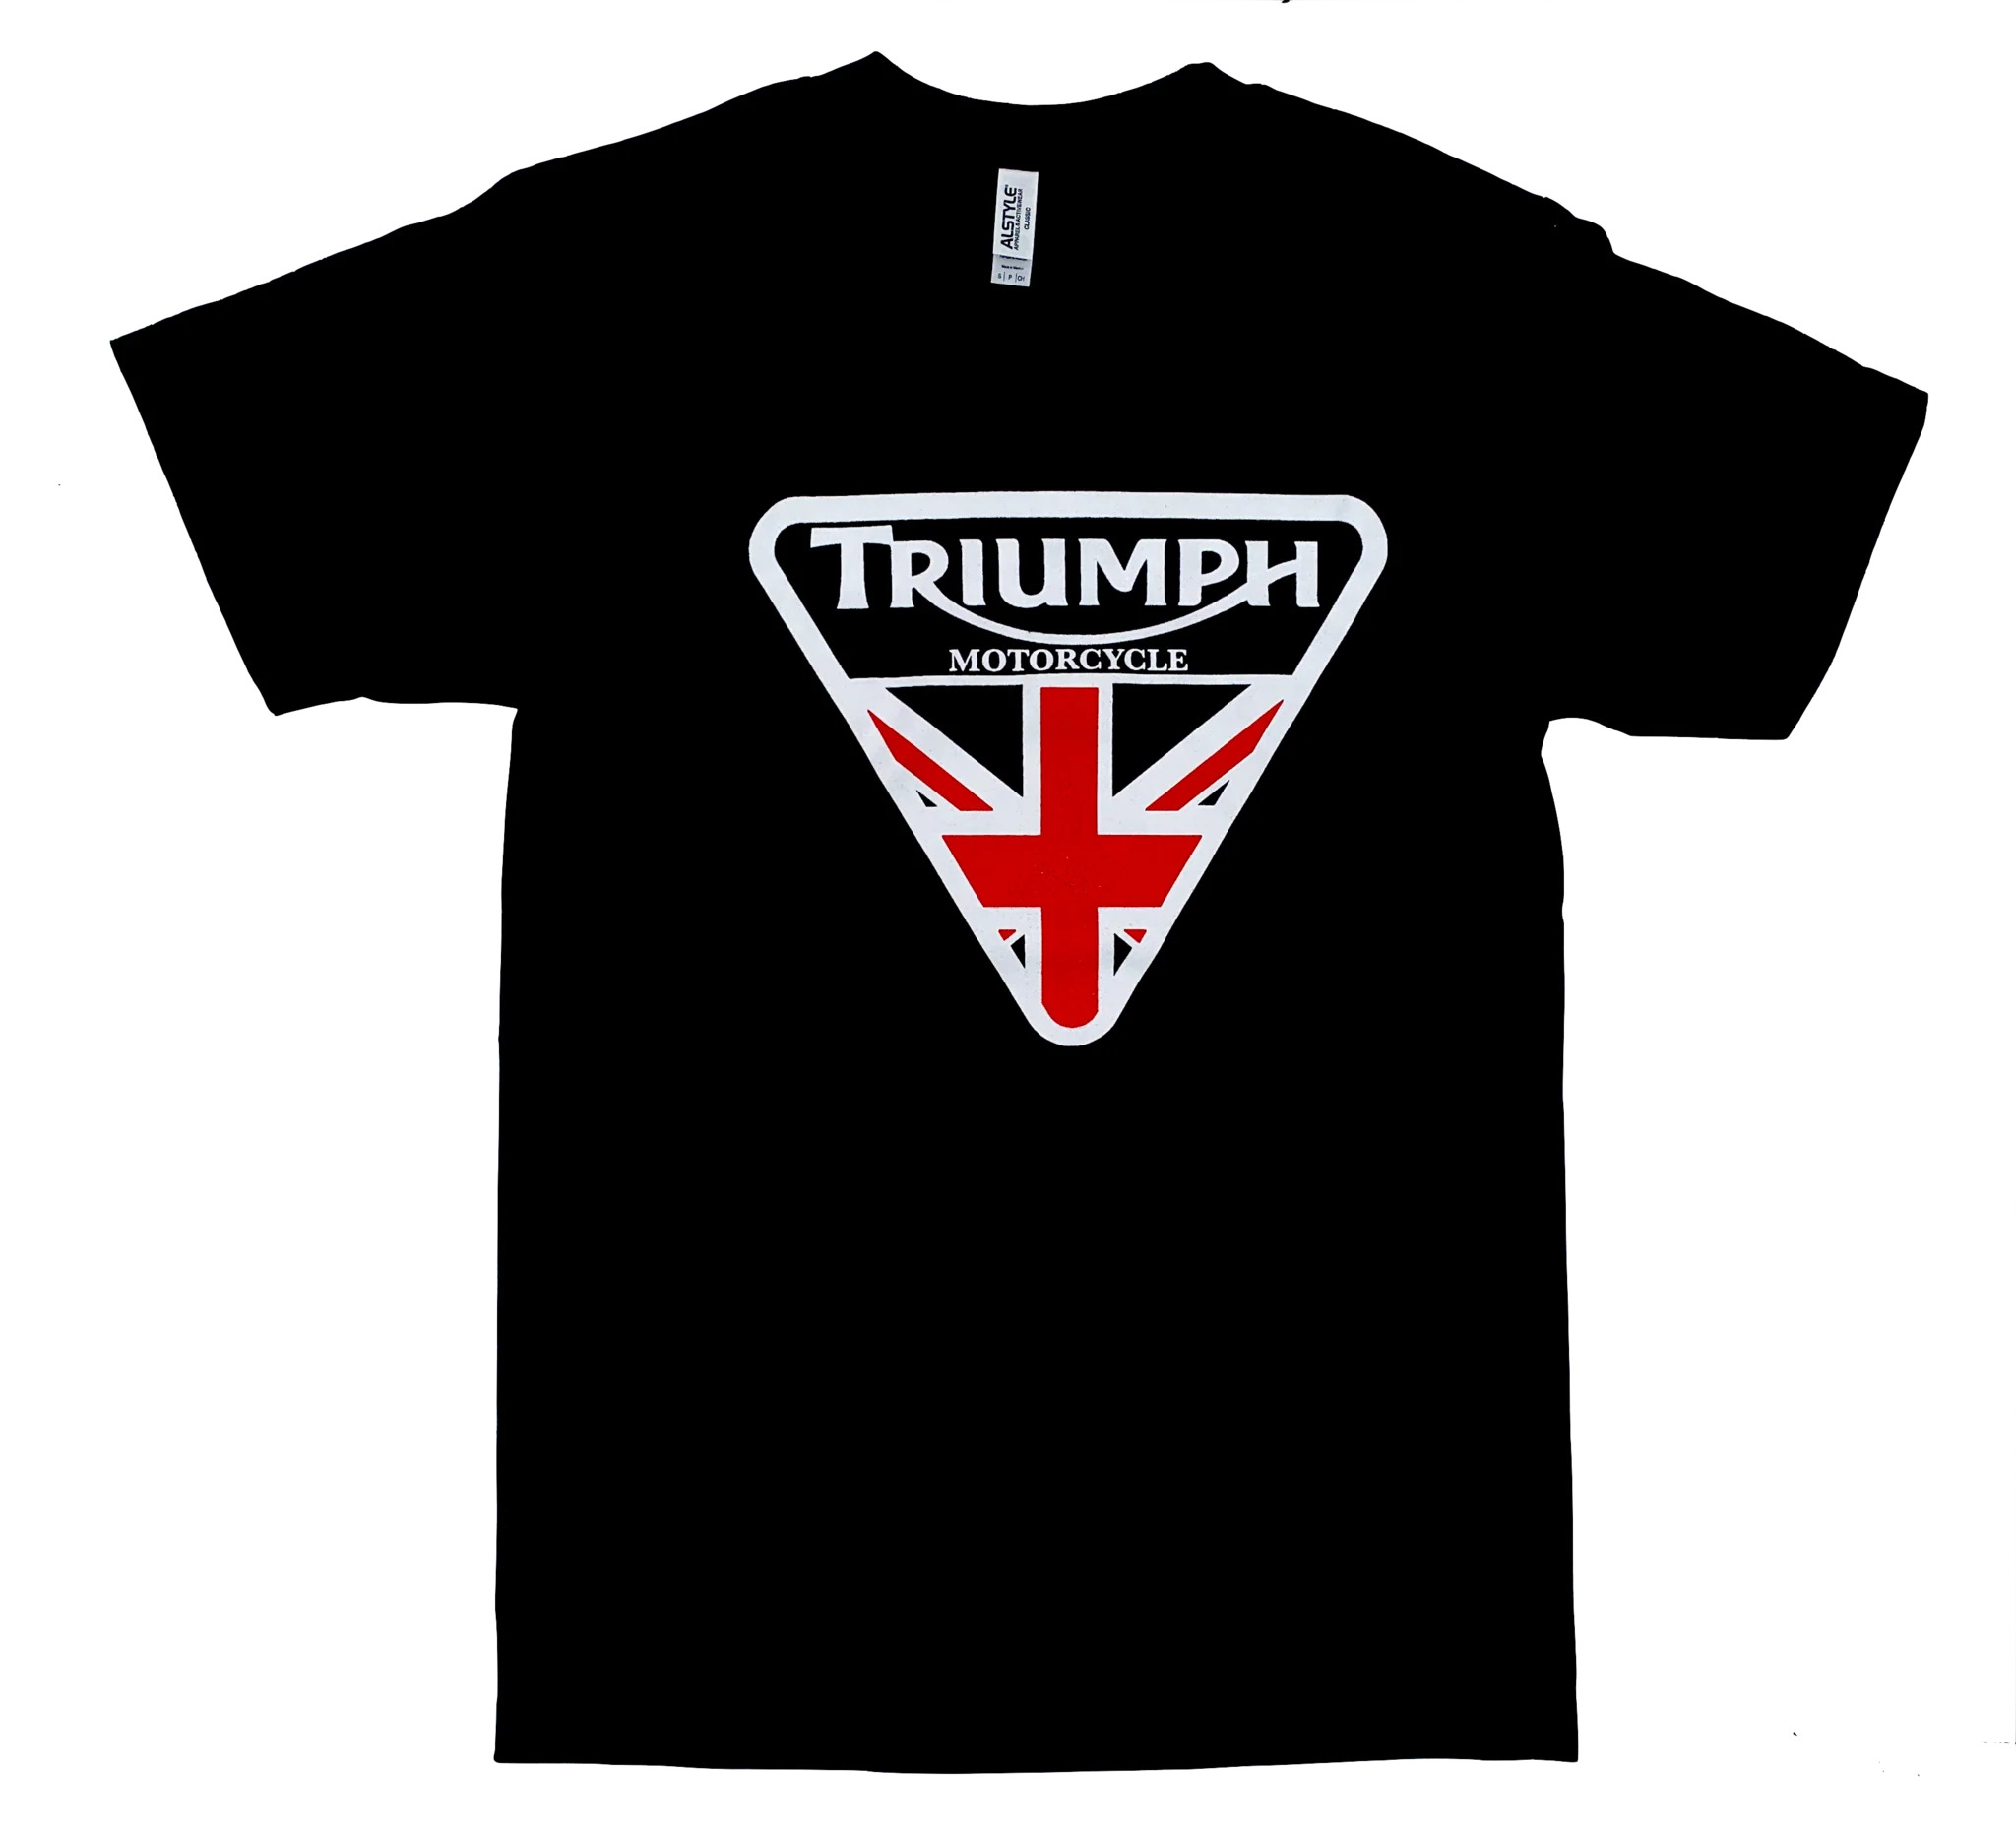 The Top 10 Most Popular Motorbike Brand T-shirts in NZ